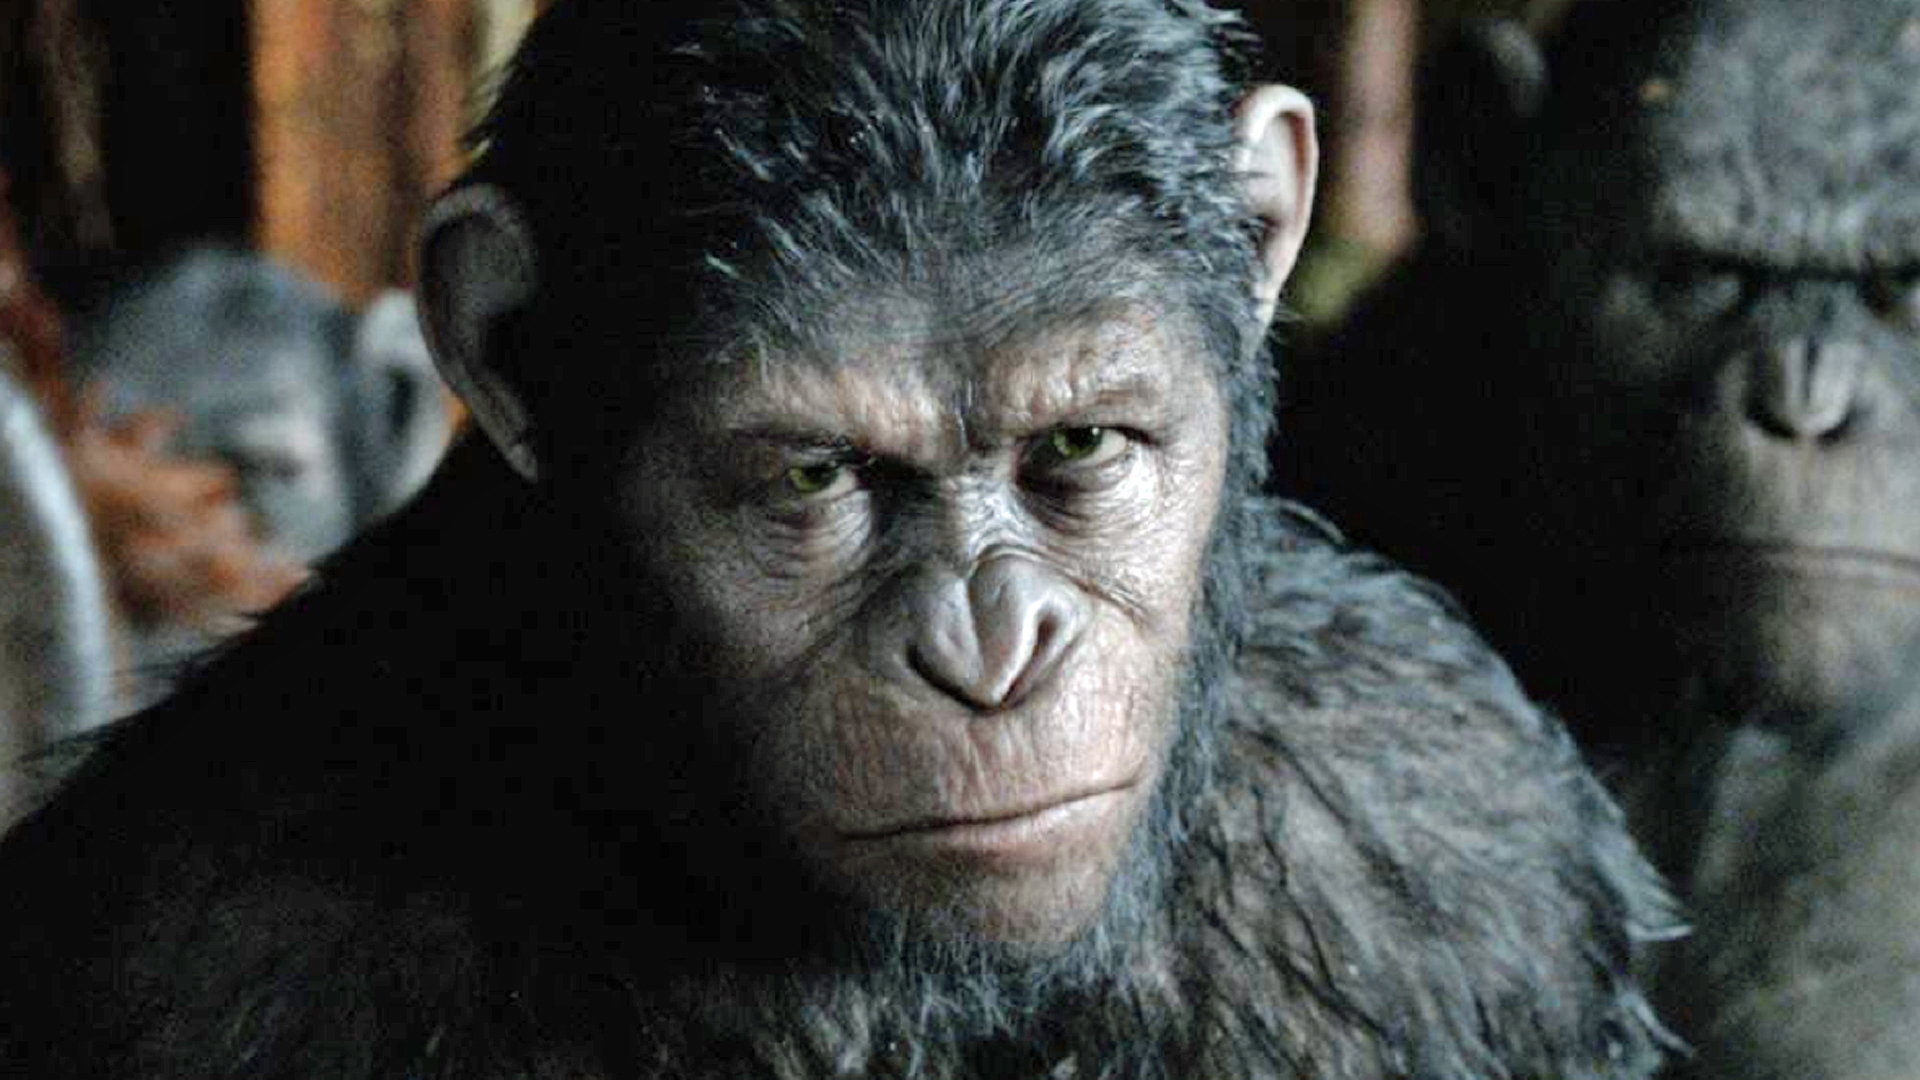 "Dawn of the of the Apes" rises to critics' expectations CBS News